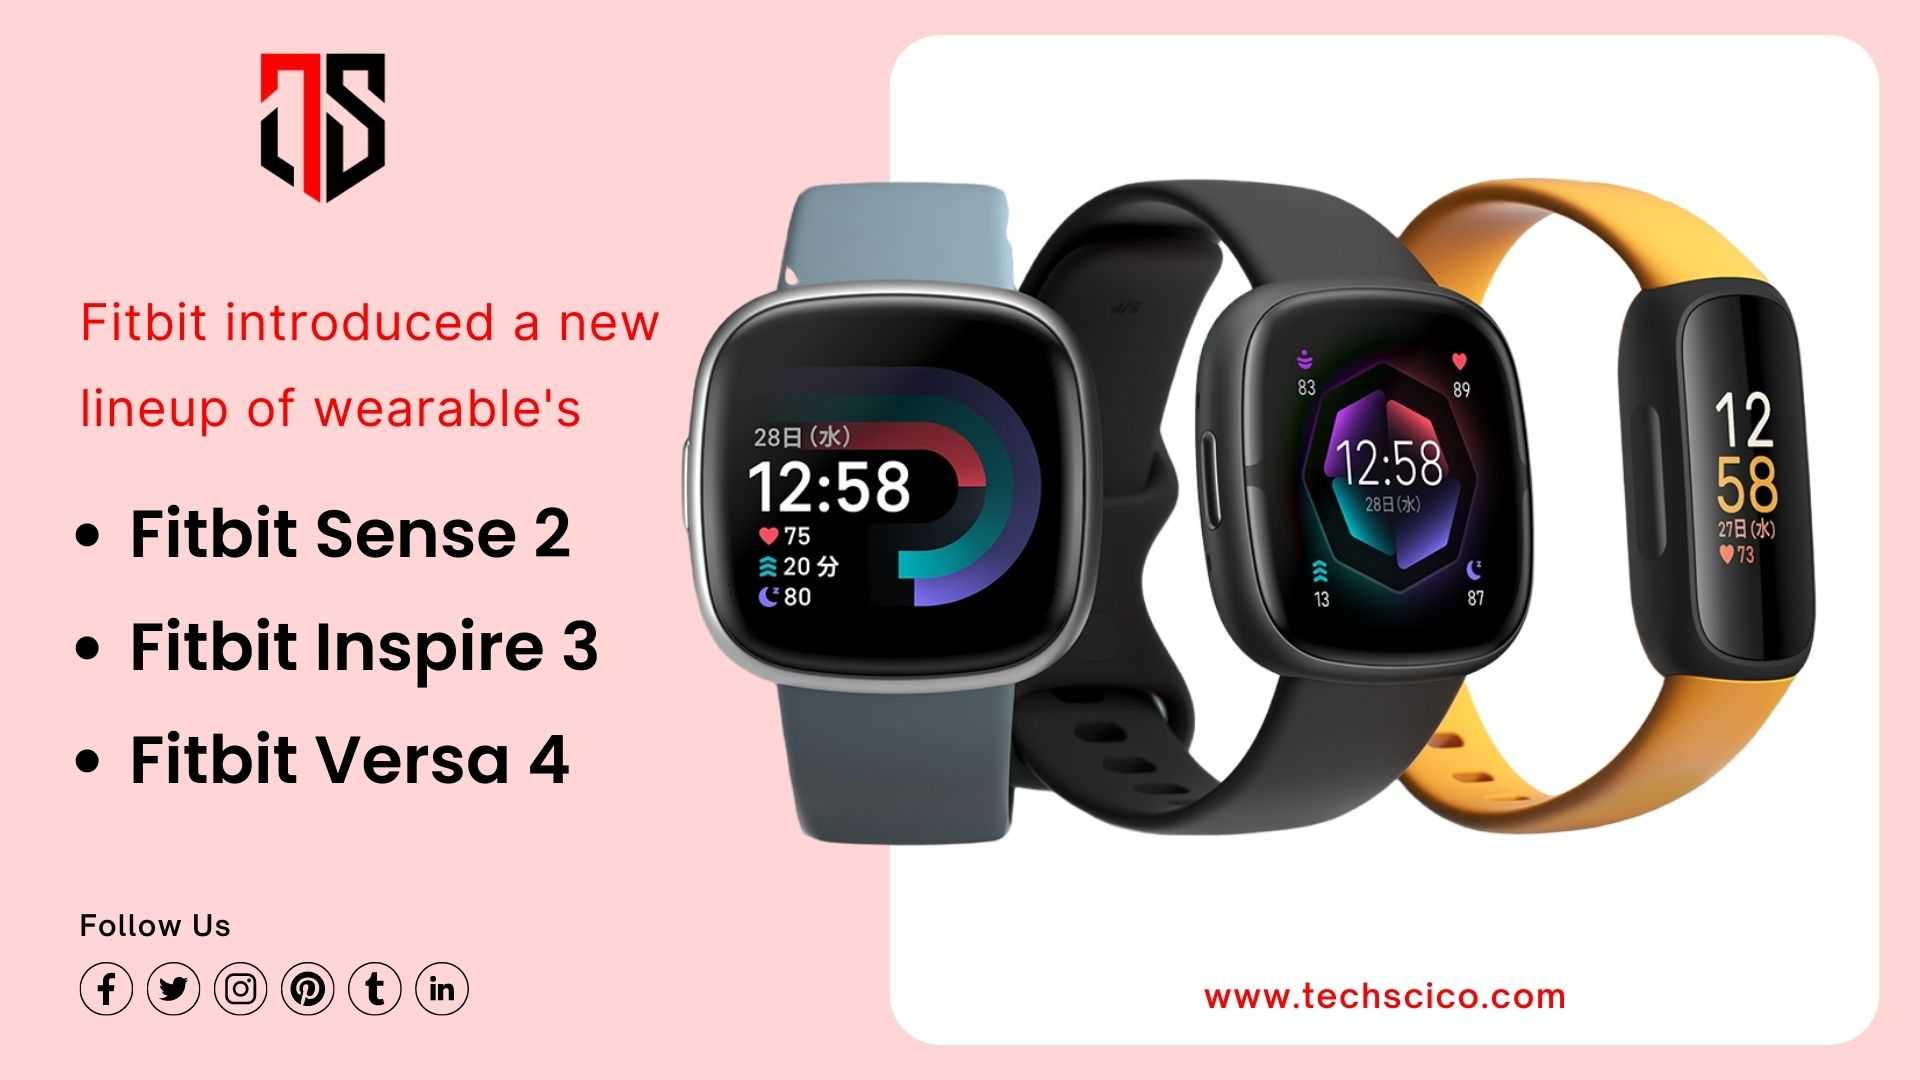 Fitbit introduced new wearable lineup: Sense 2, Inspire 3, Versa 4